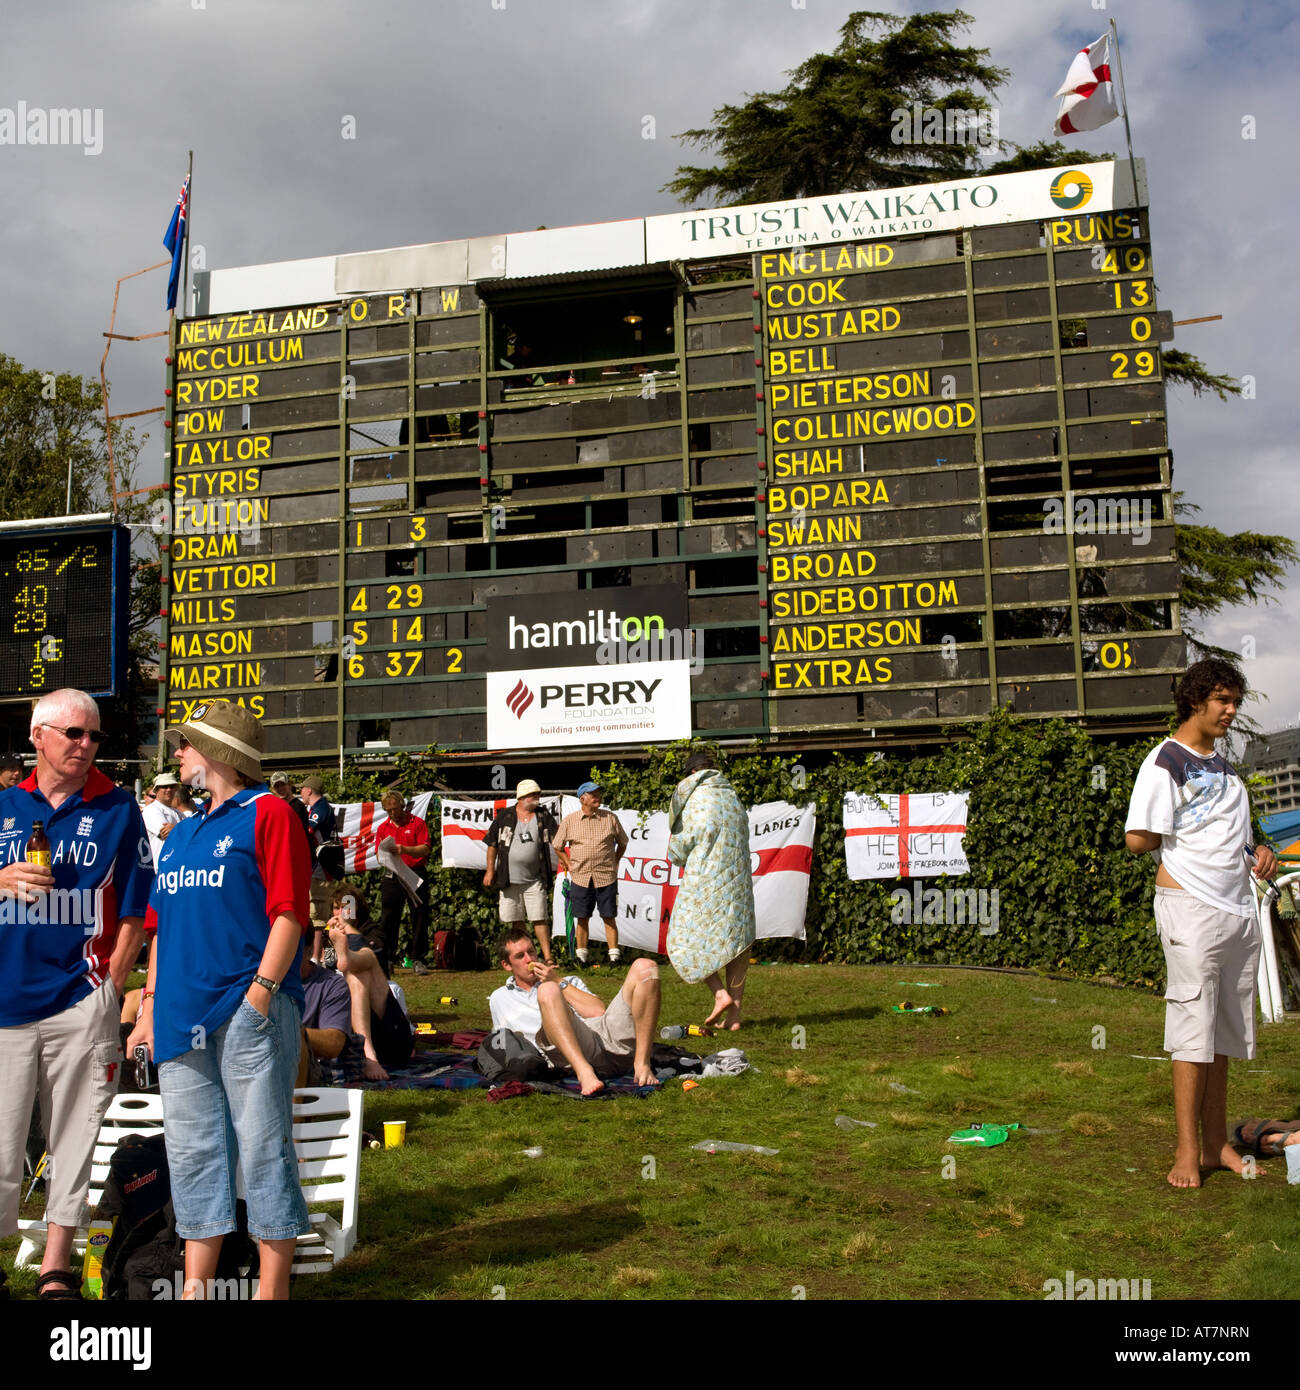 New Zealand v England scoreboard with fans and supporters on embankment Stock Photo